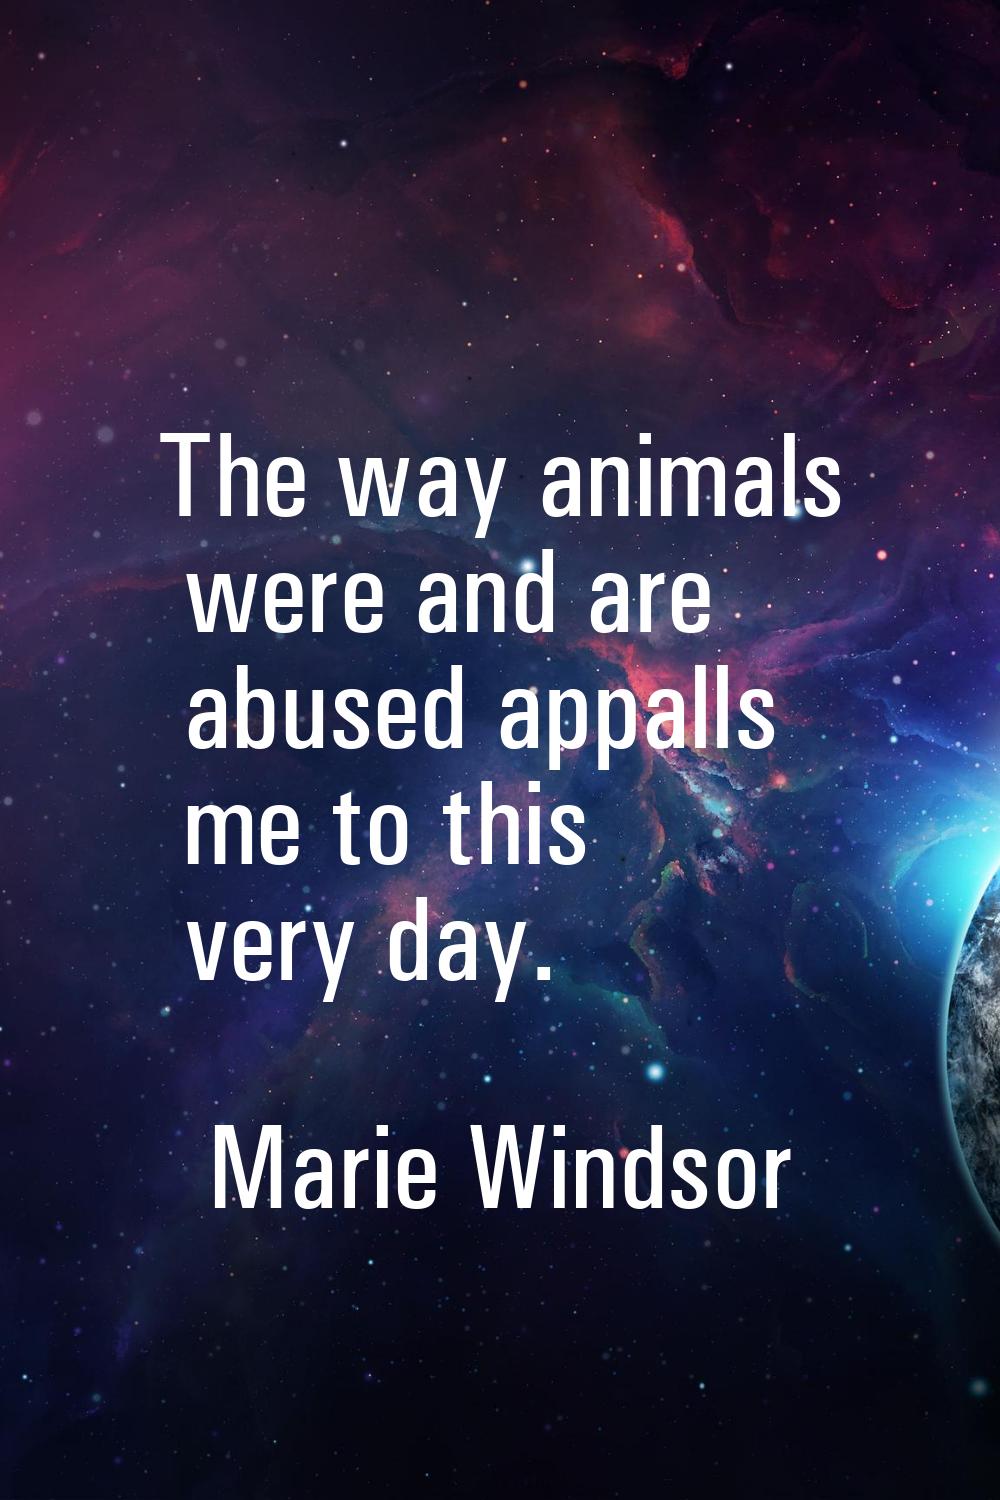 The way animals were and are abused appalls me to this very day.